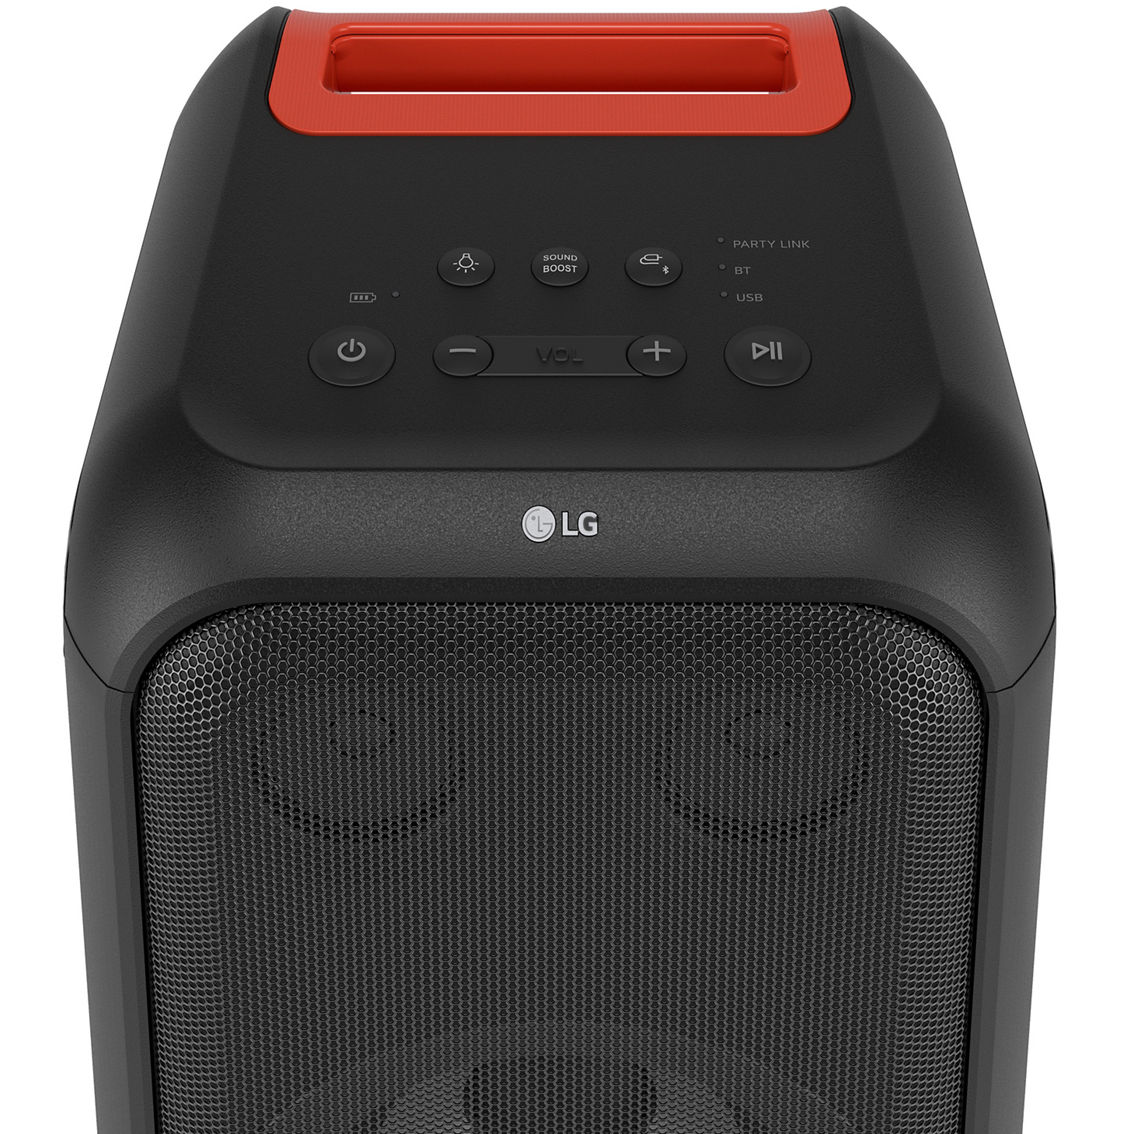 LG XL5S XBOOM 200W 2.1 Channel Portable Party Speaker with Multi-color Lighting - Image 4 of 4